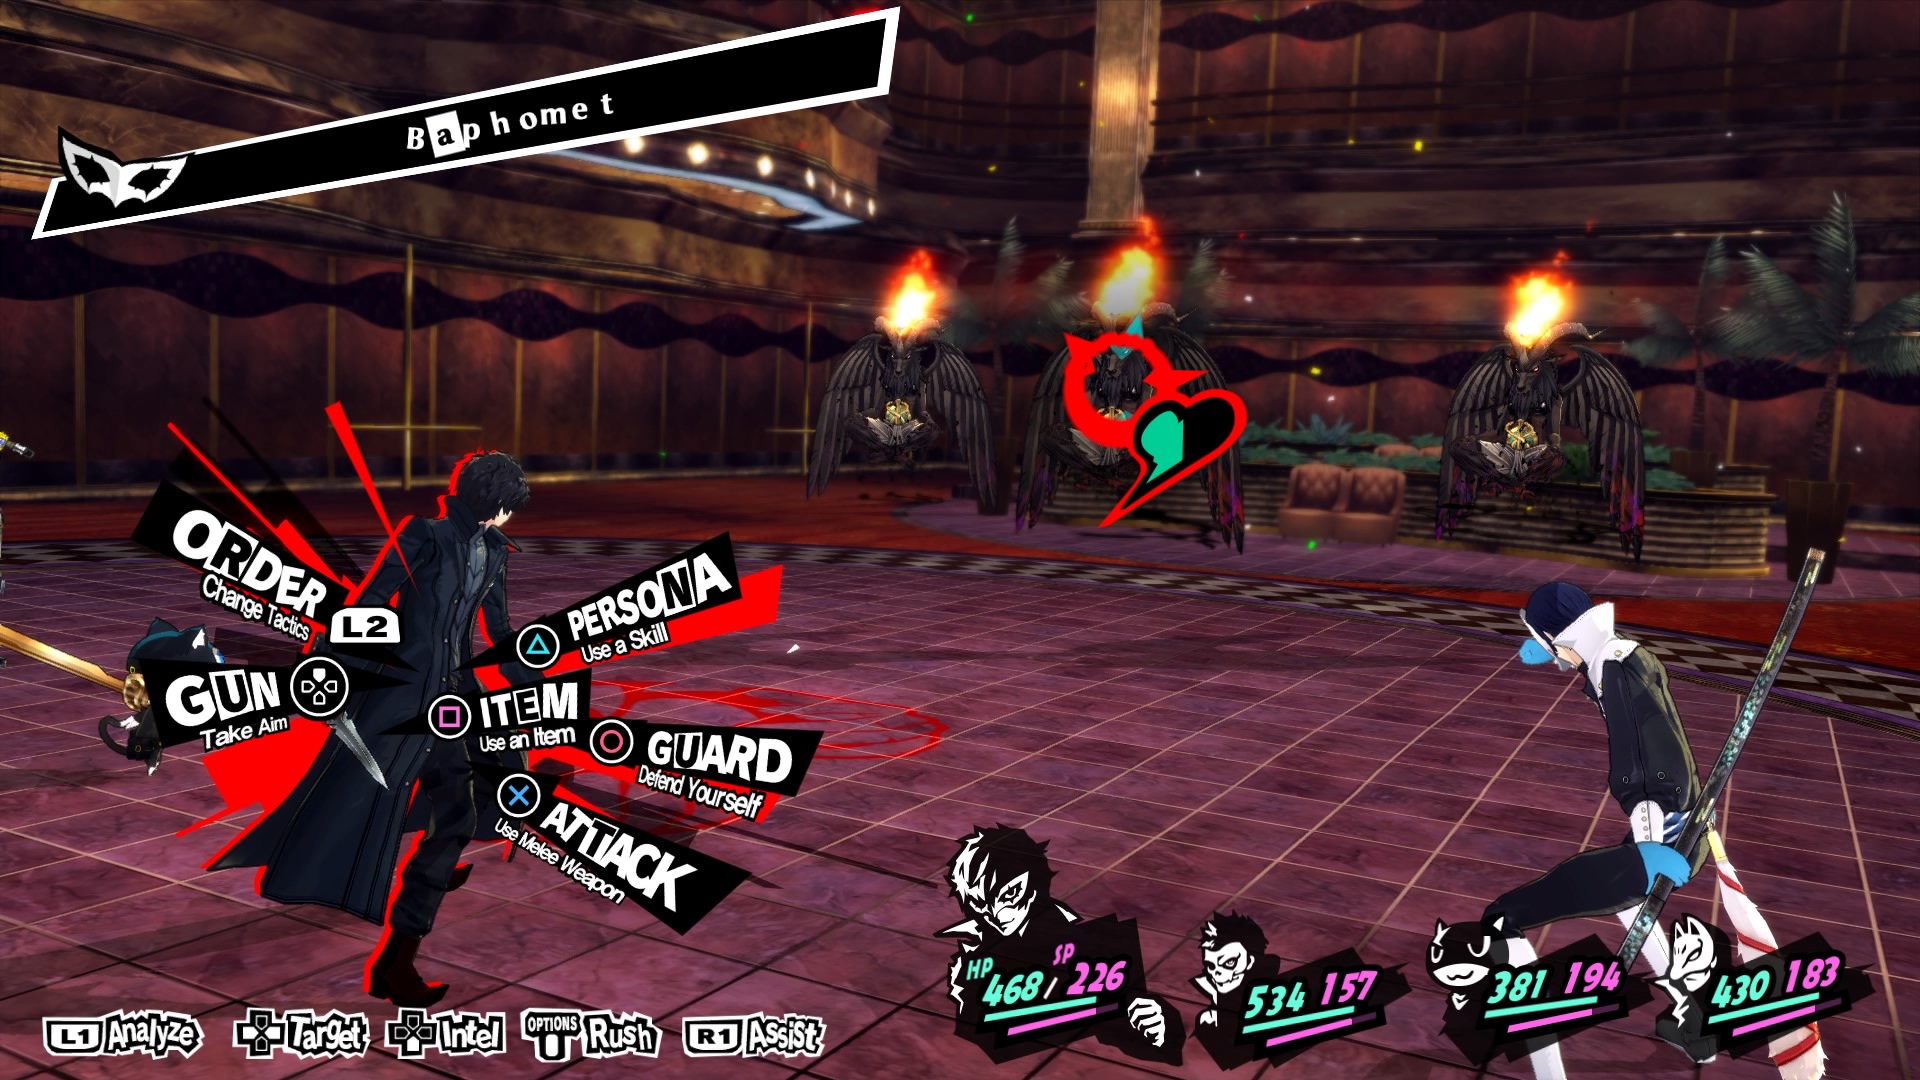 Where to find berith persona 5 royal